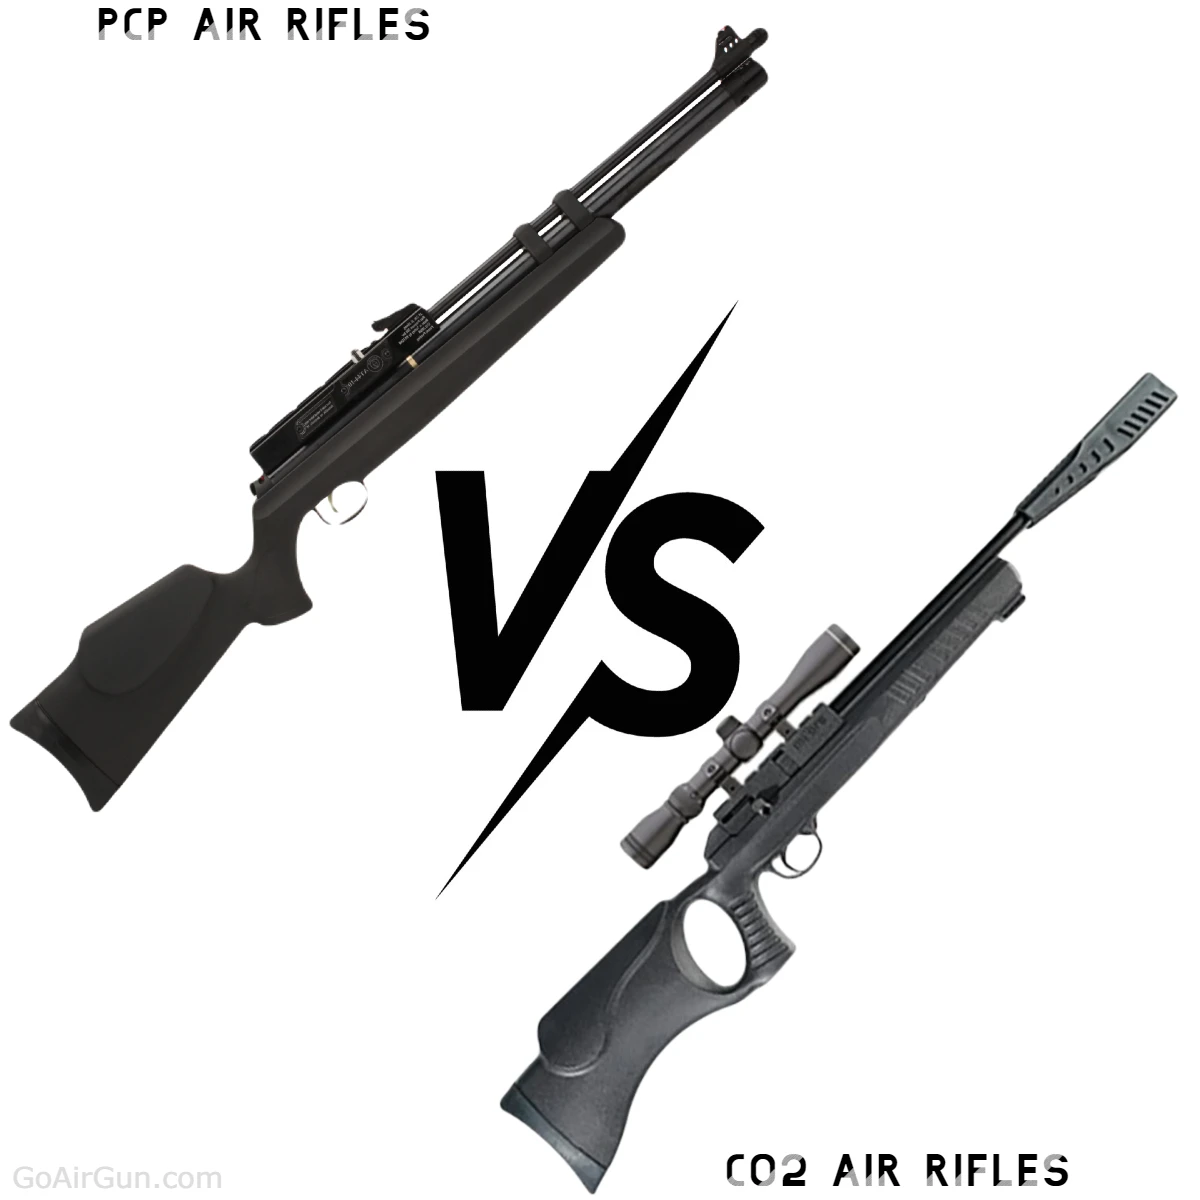 Differences Between CO2 and PCP Air Rifles